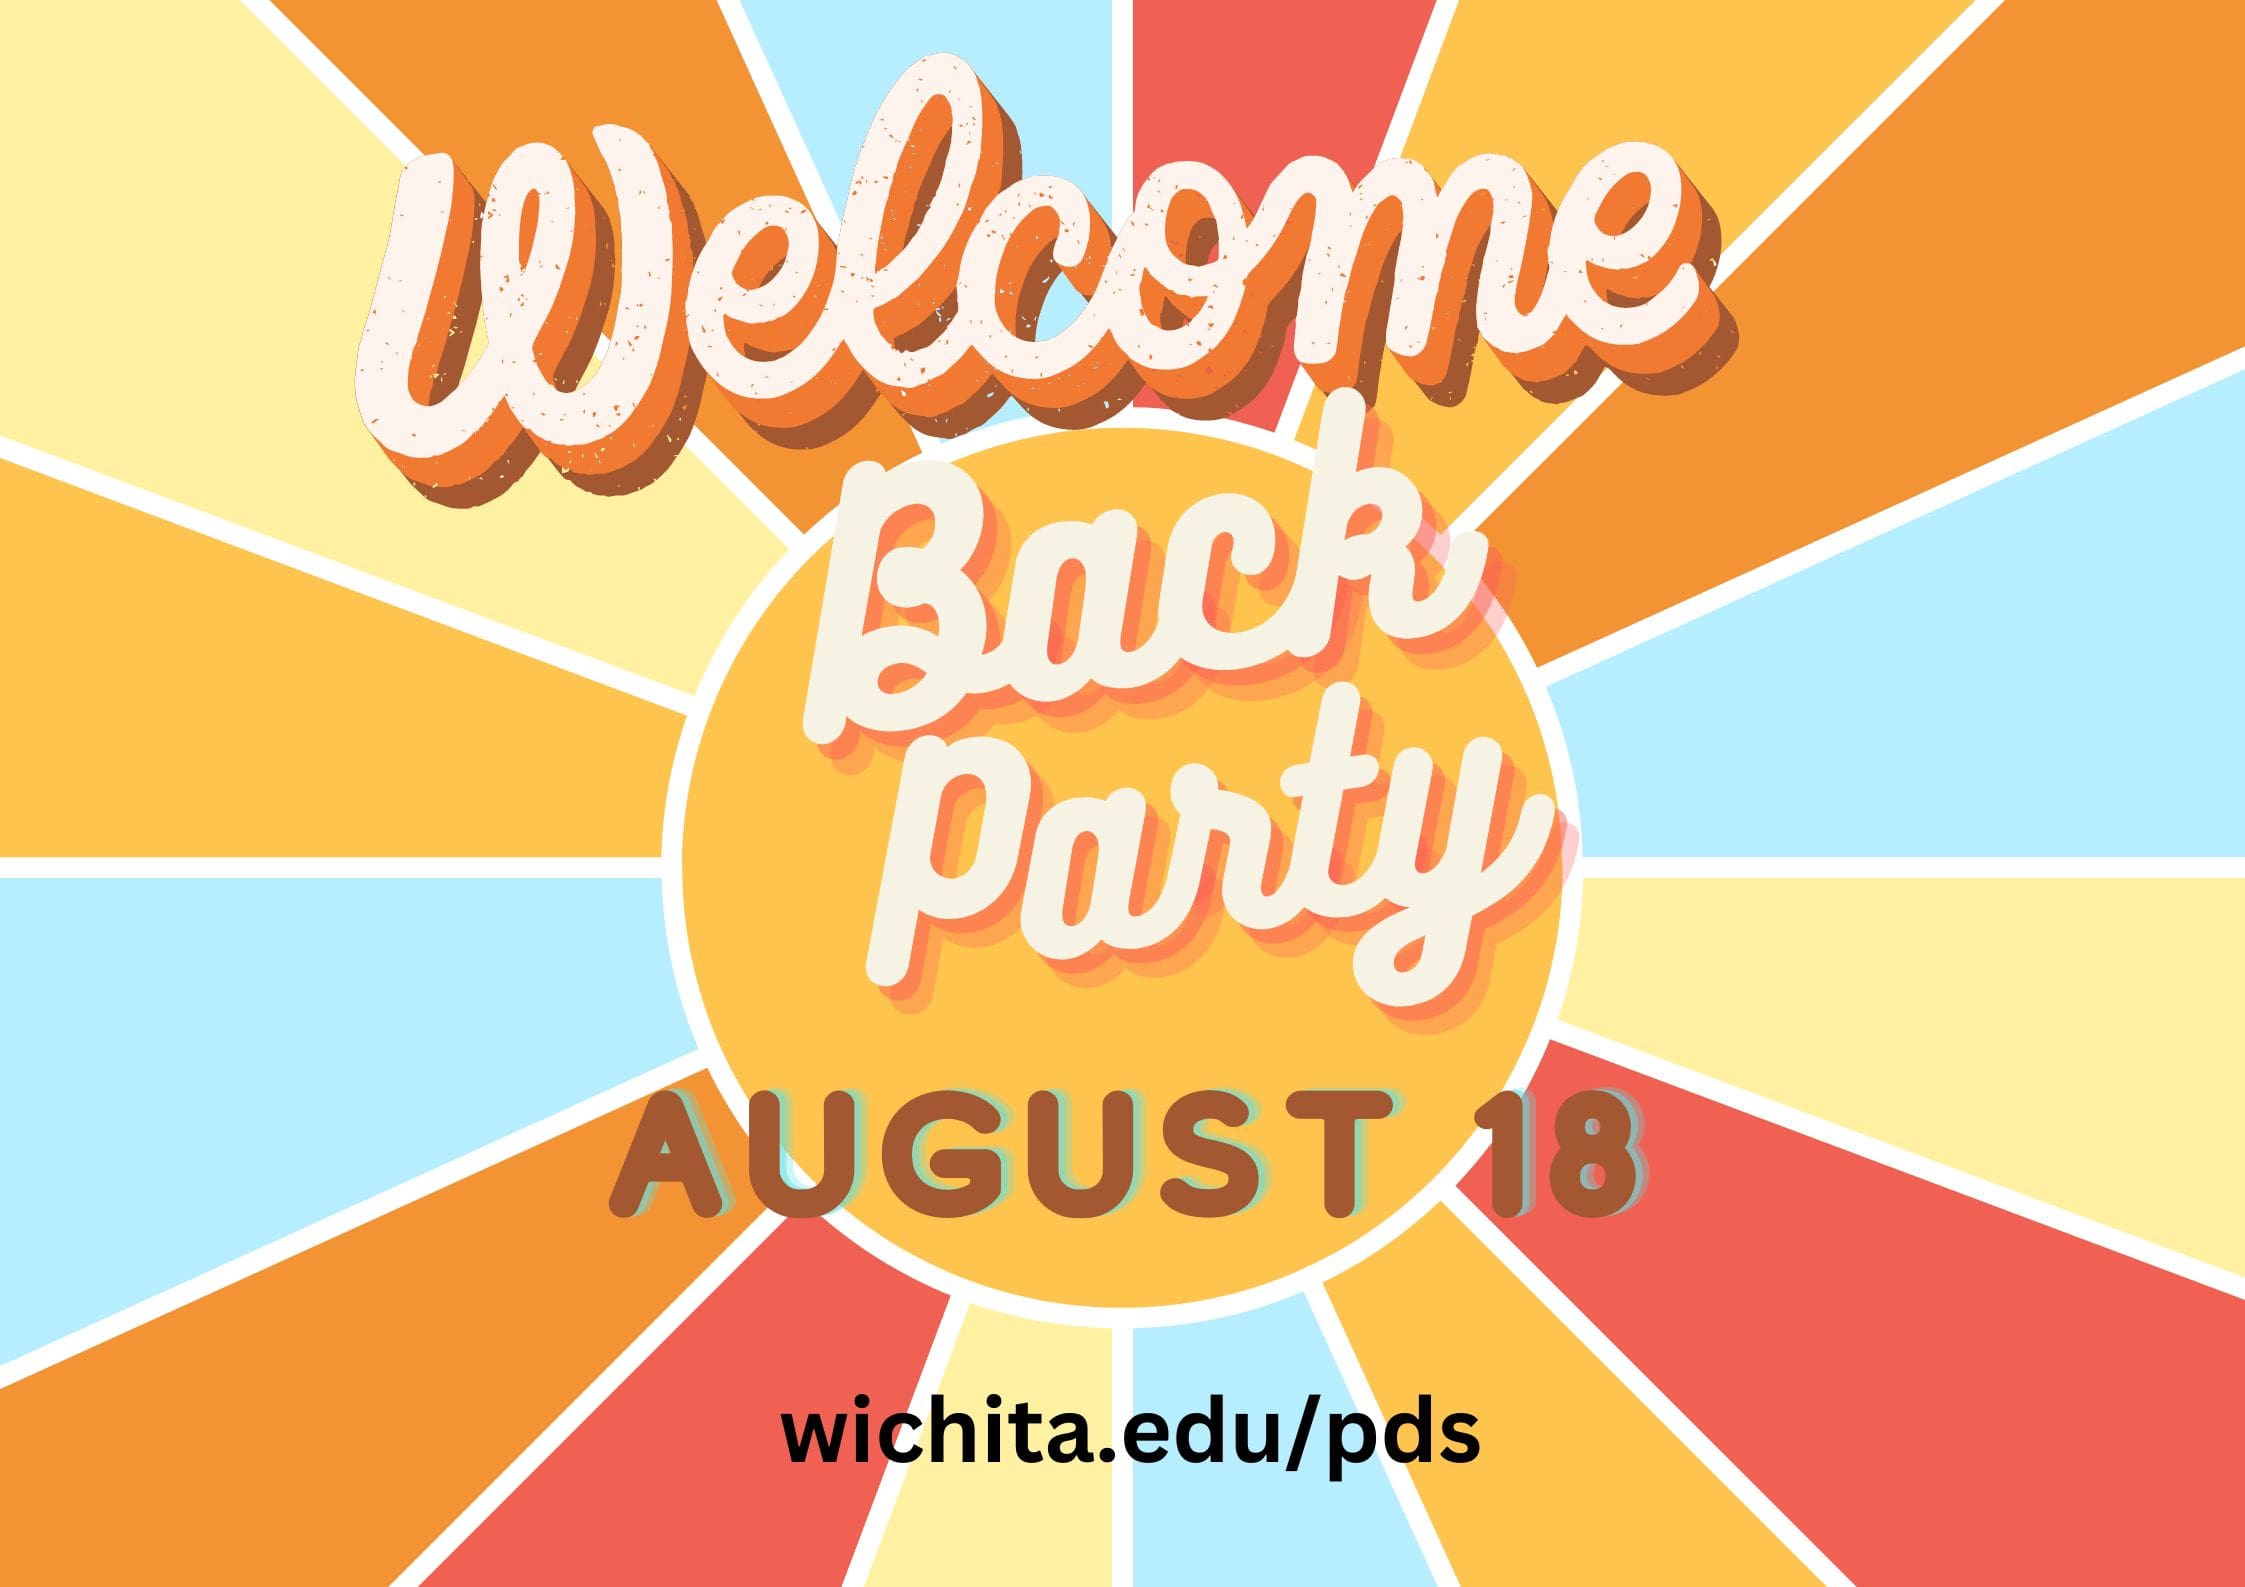 Colorful with image the following text: "Welcome Back Party. August 18. Wcihita.edu/pds"